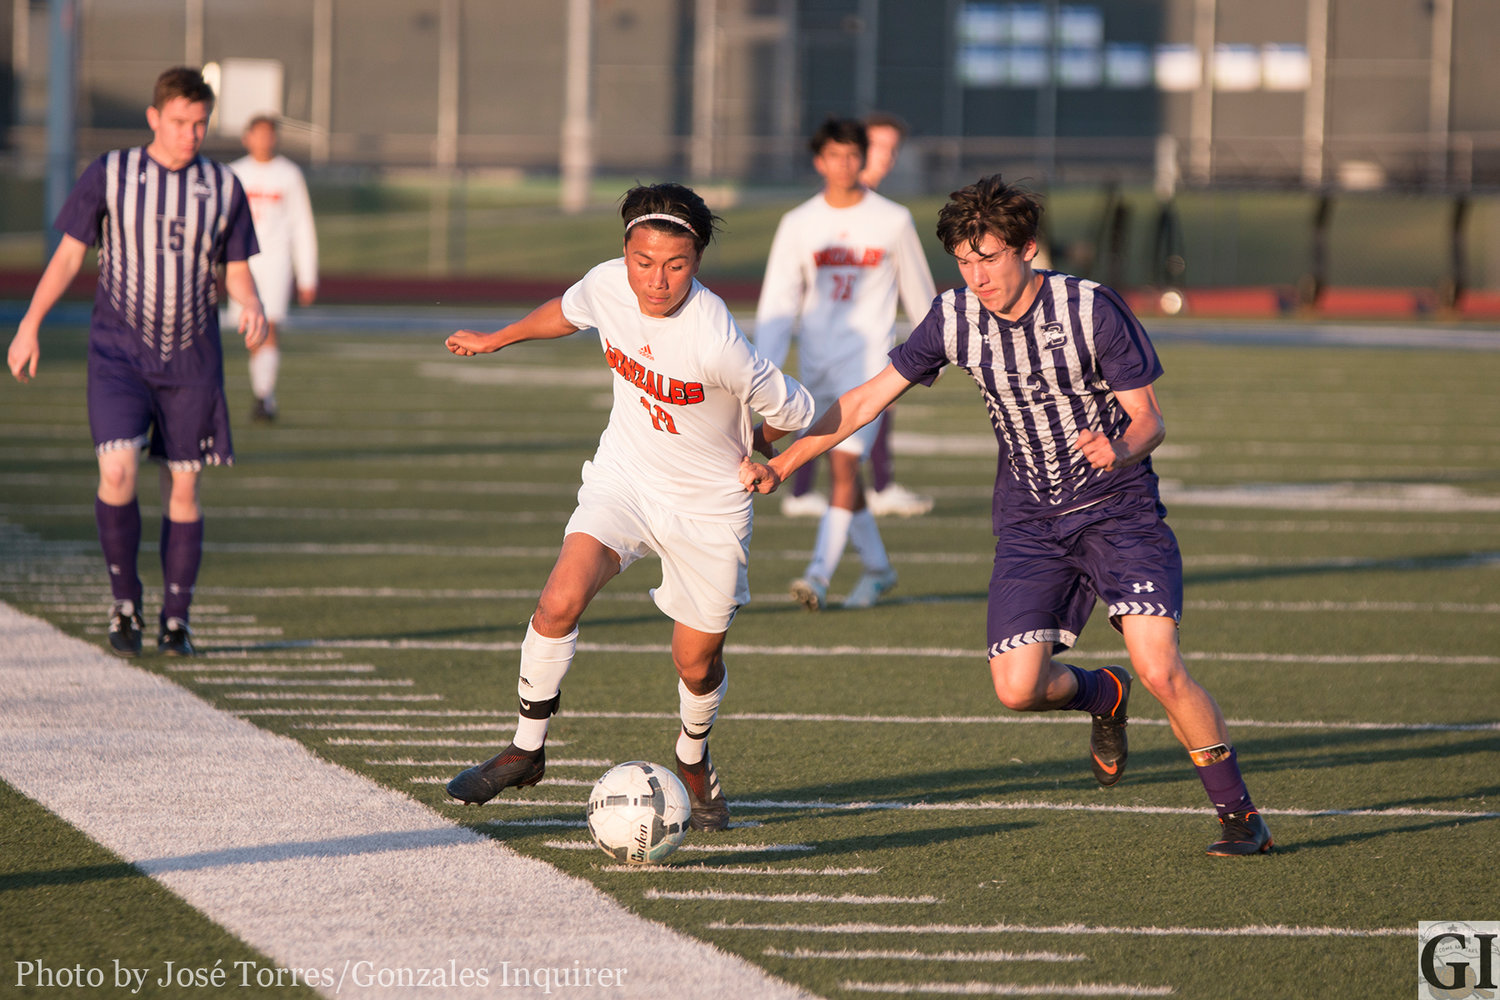 Daniel Cruz (10) dribbles through a defender in the Apaches playoff loss against Boerne in March. Gonzales hosts a 12-team tournament this weekend before facing off against Boerne in non-district play next Tuesday.